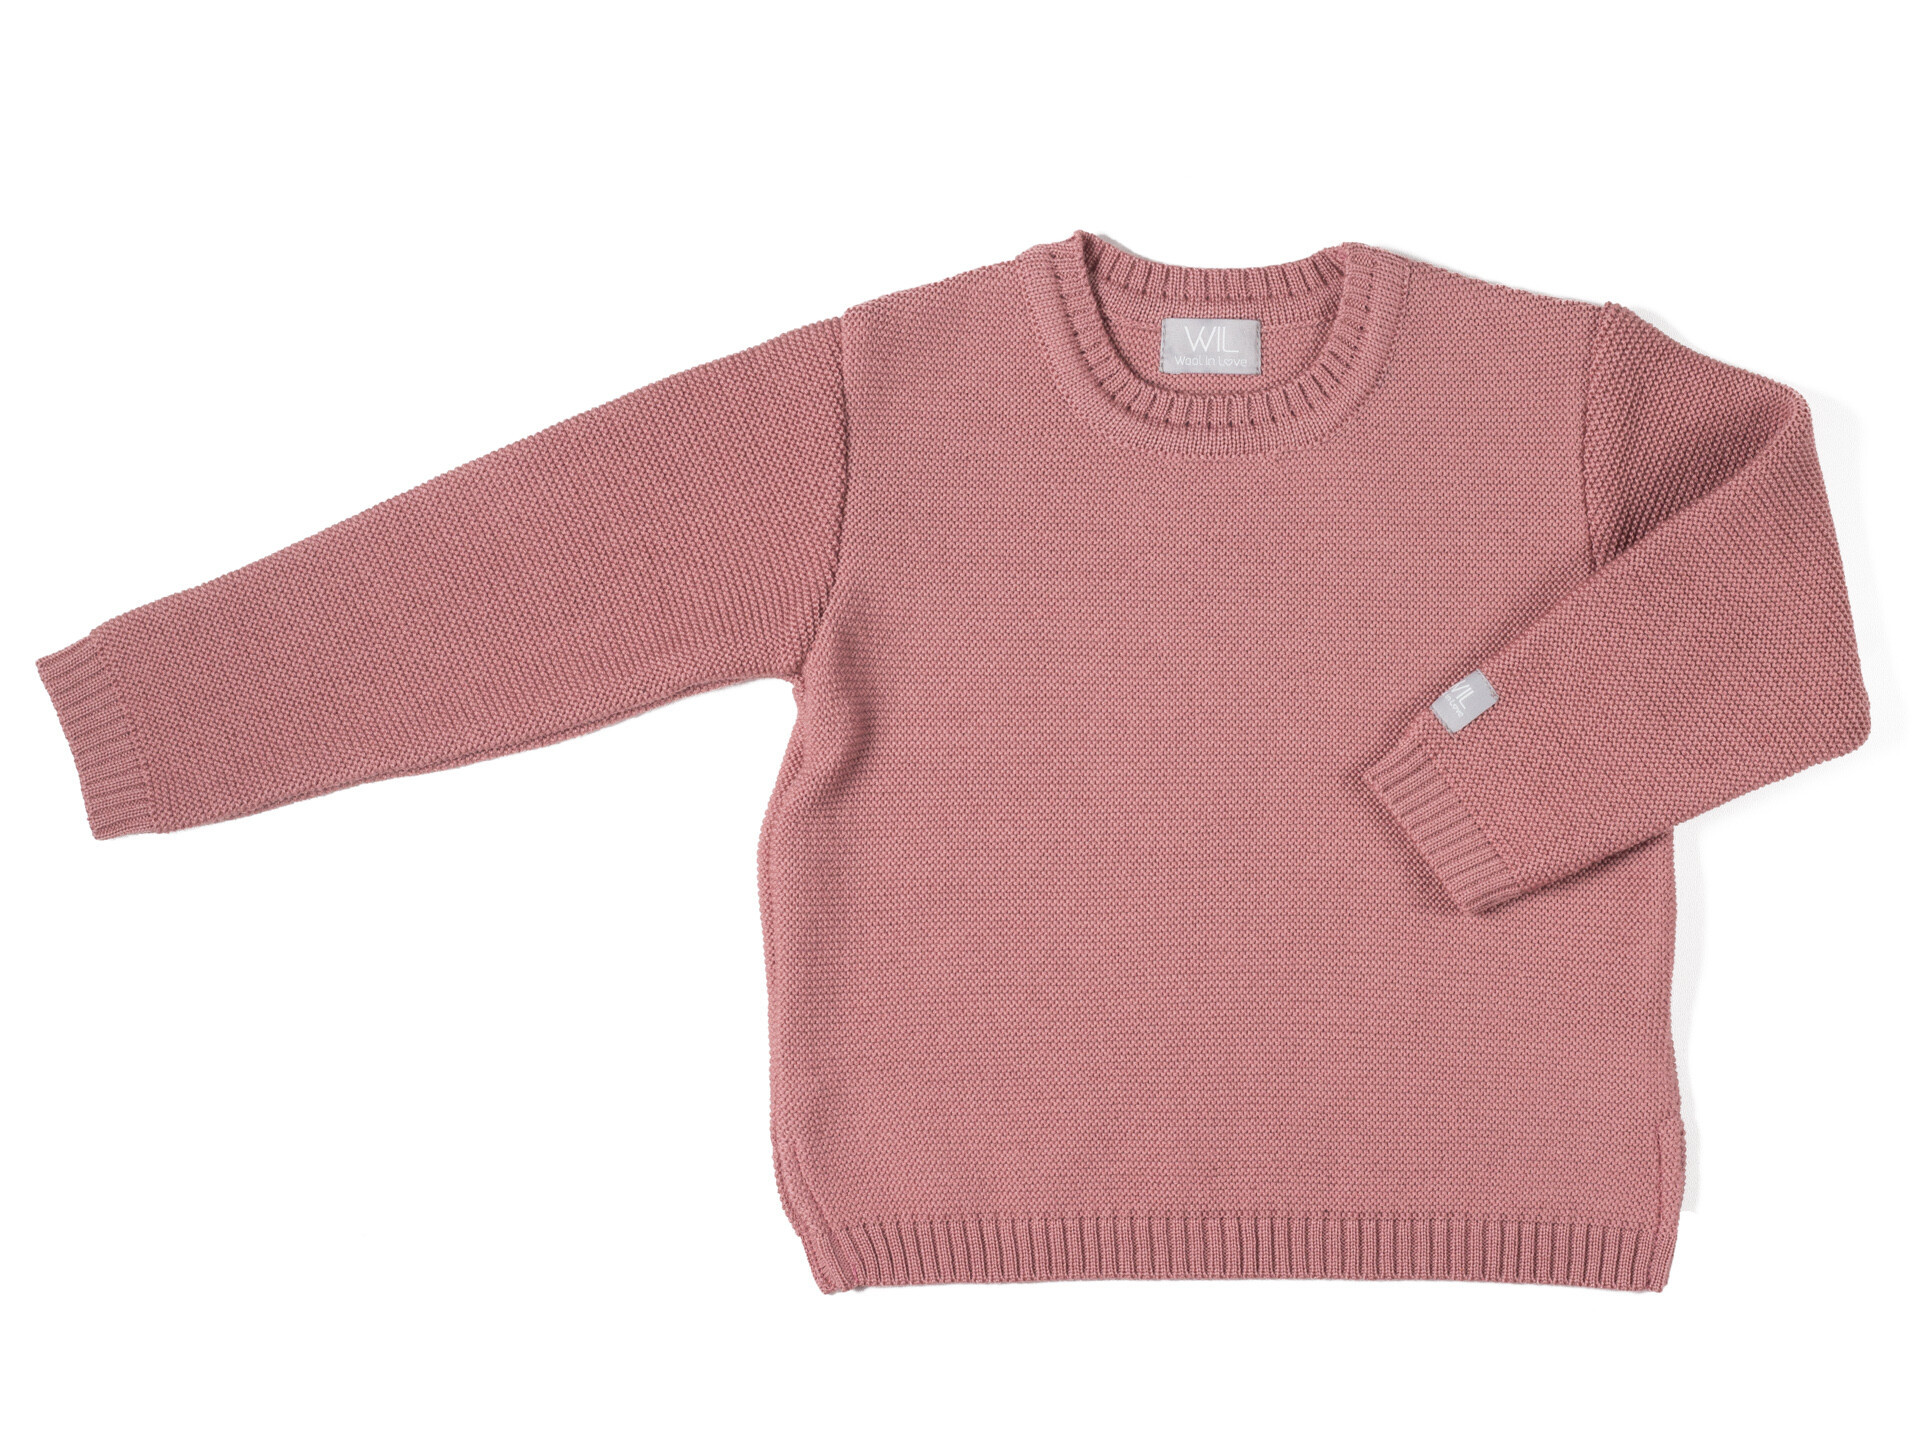 Kids and babies merino wool warm and thick sweater AMITY.  Merino wool gives warmth and prevents overheating while playing.